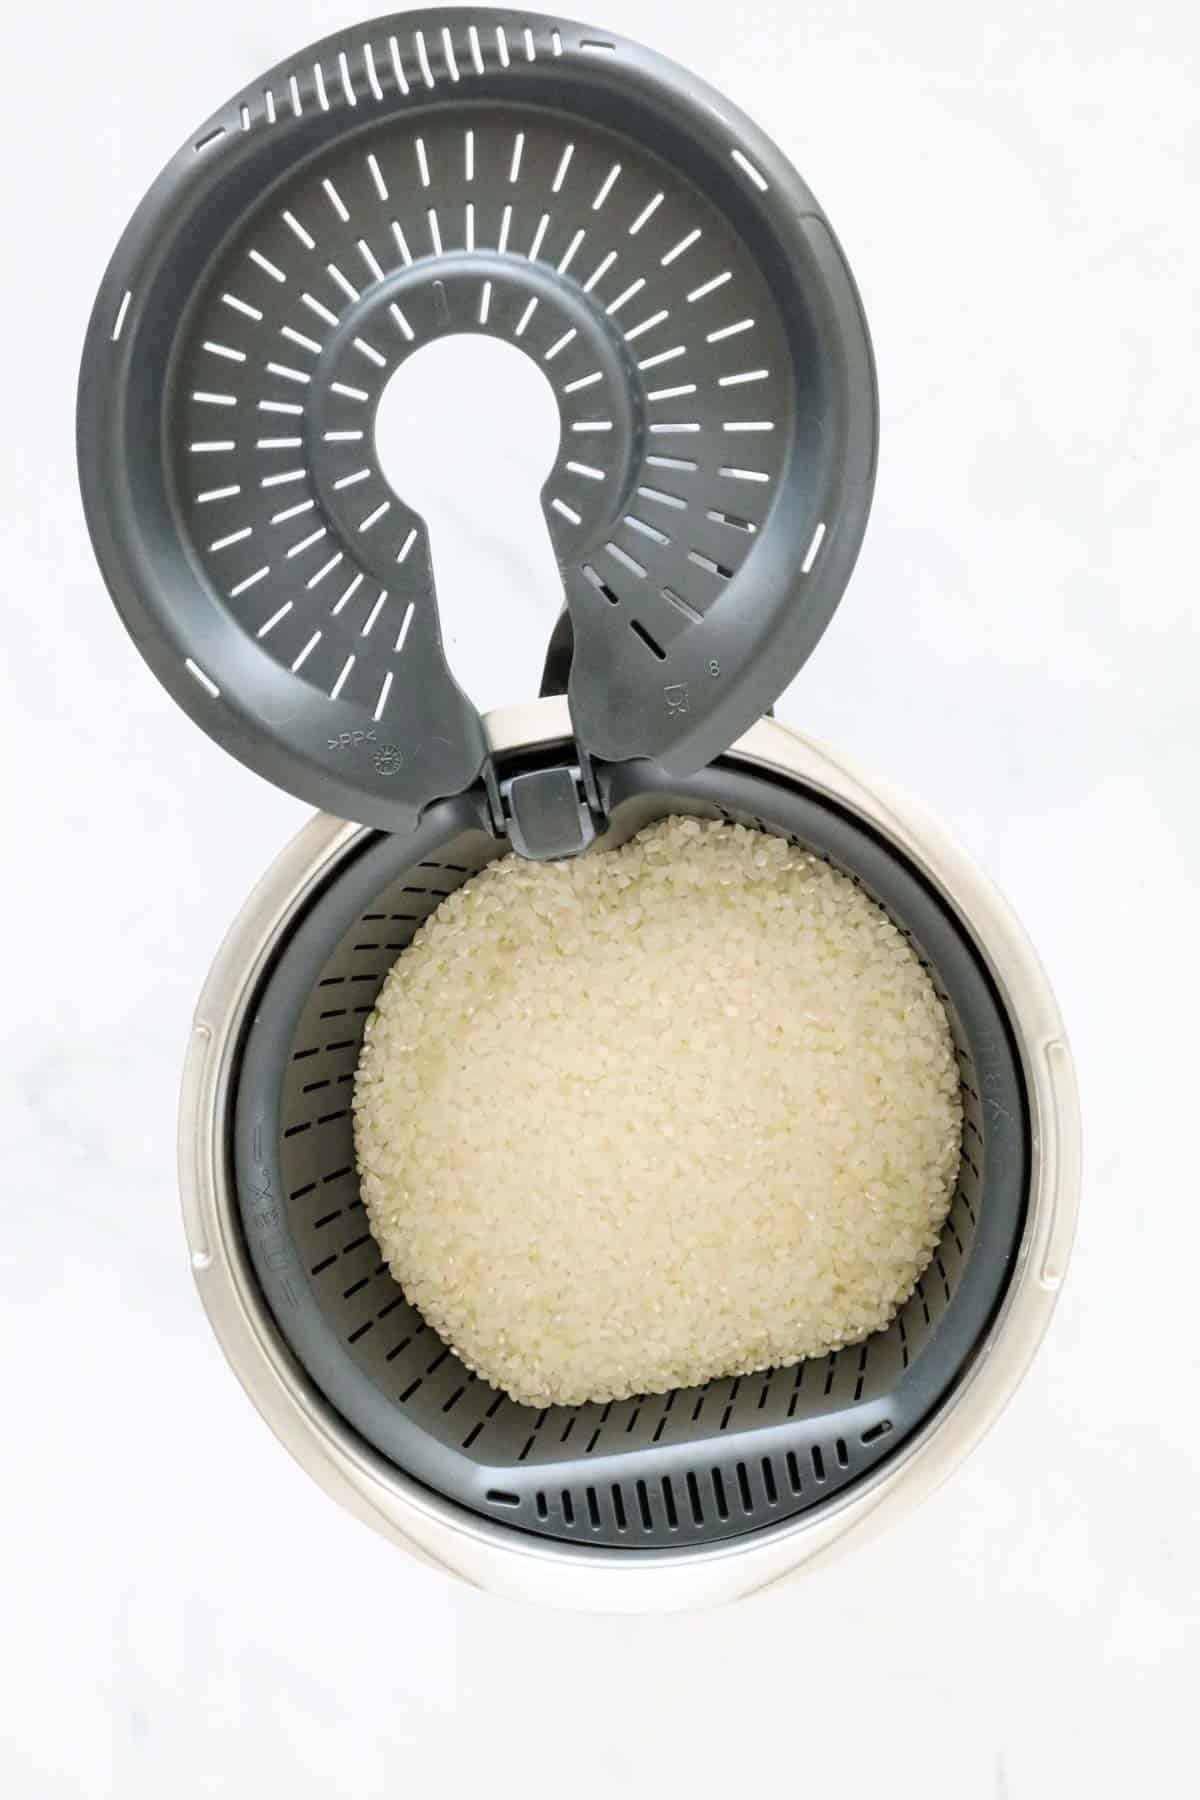 Uncooked rice in a Thermomix simmering basket.